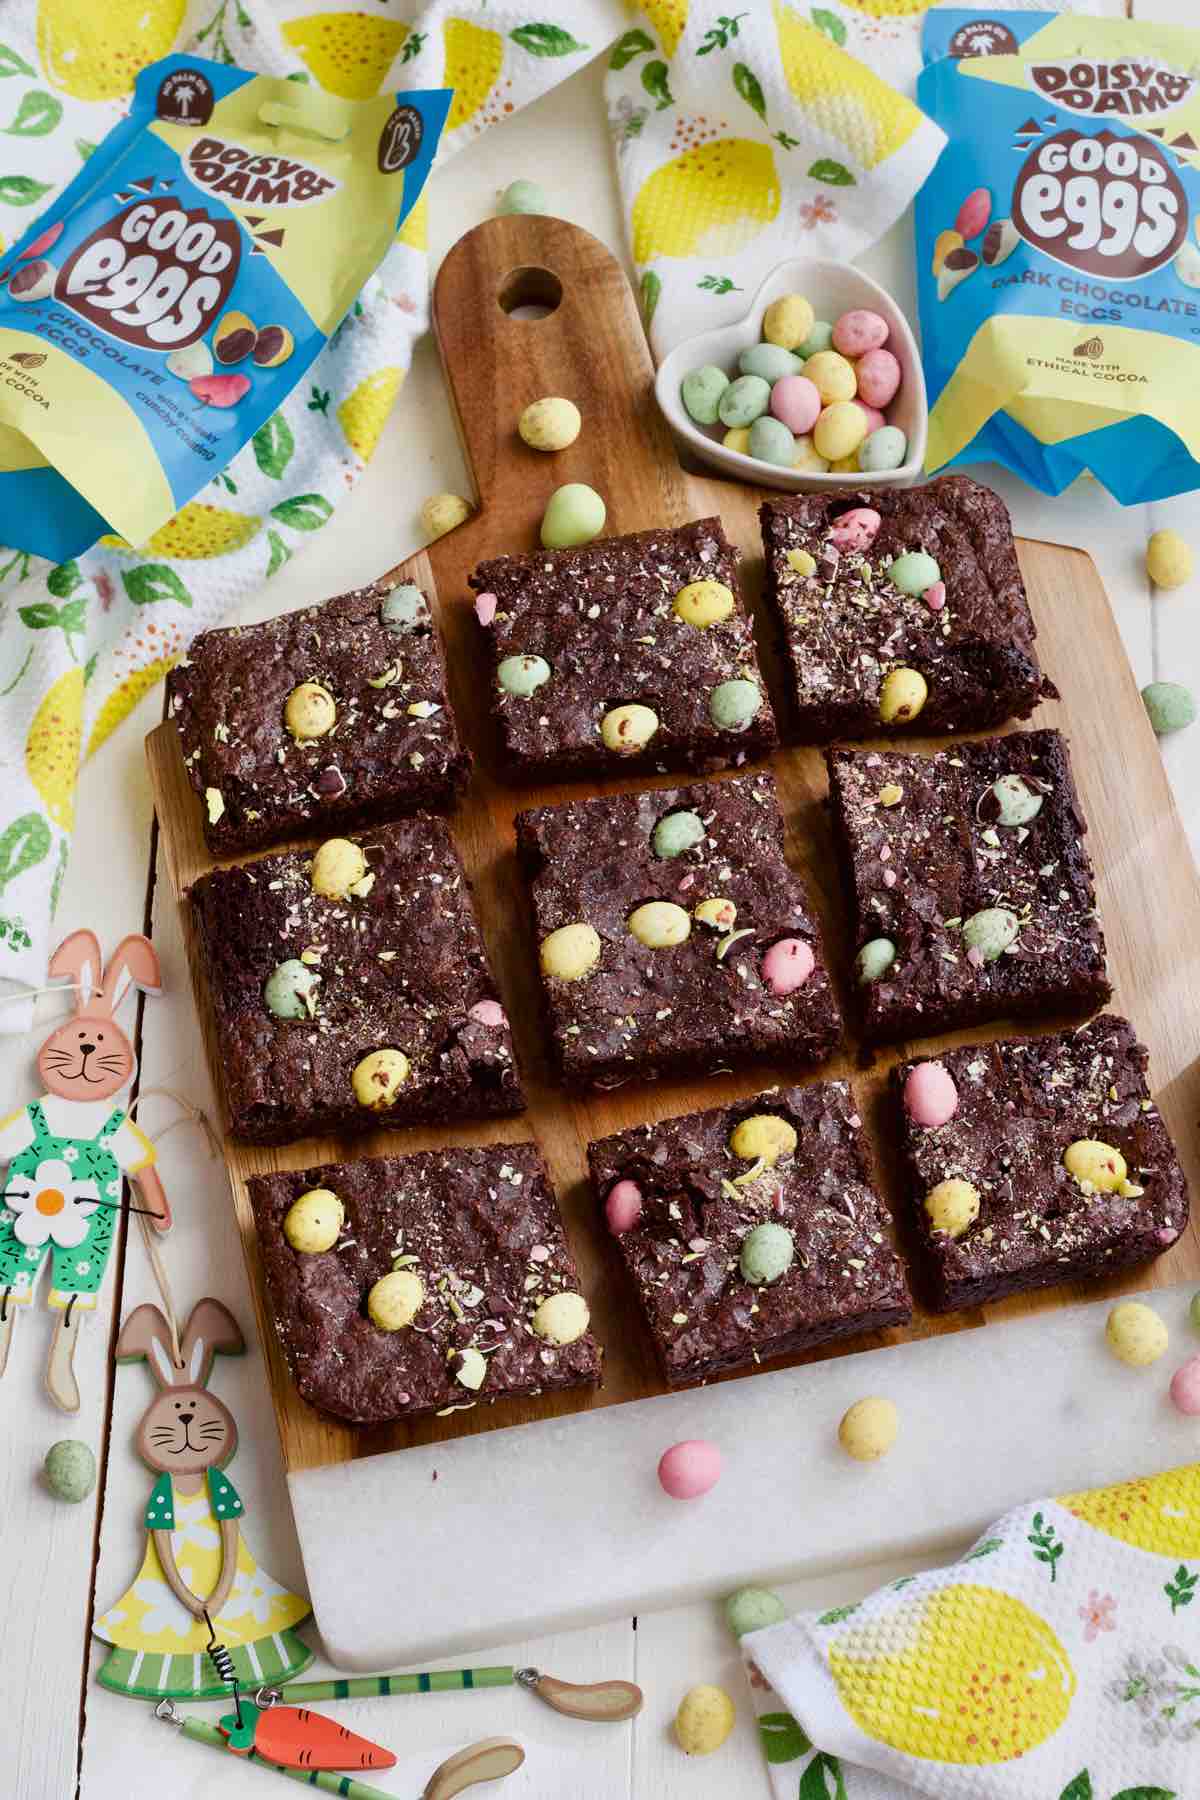 Mini egg brownies cut into 9 squares on a board.